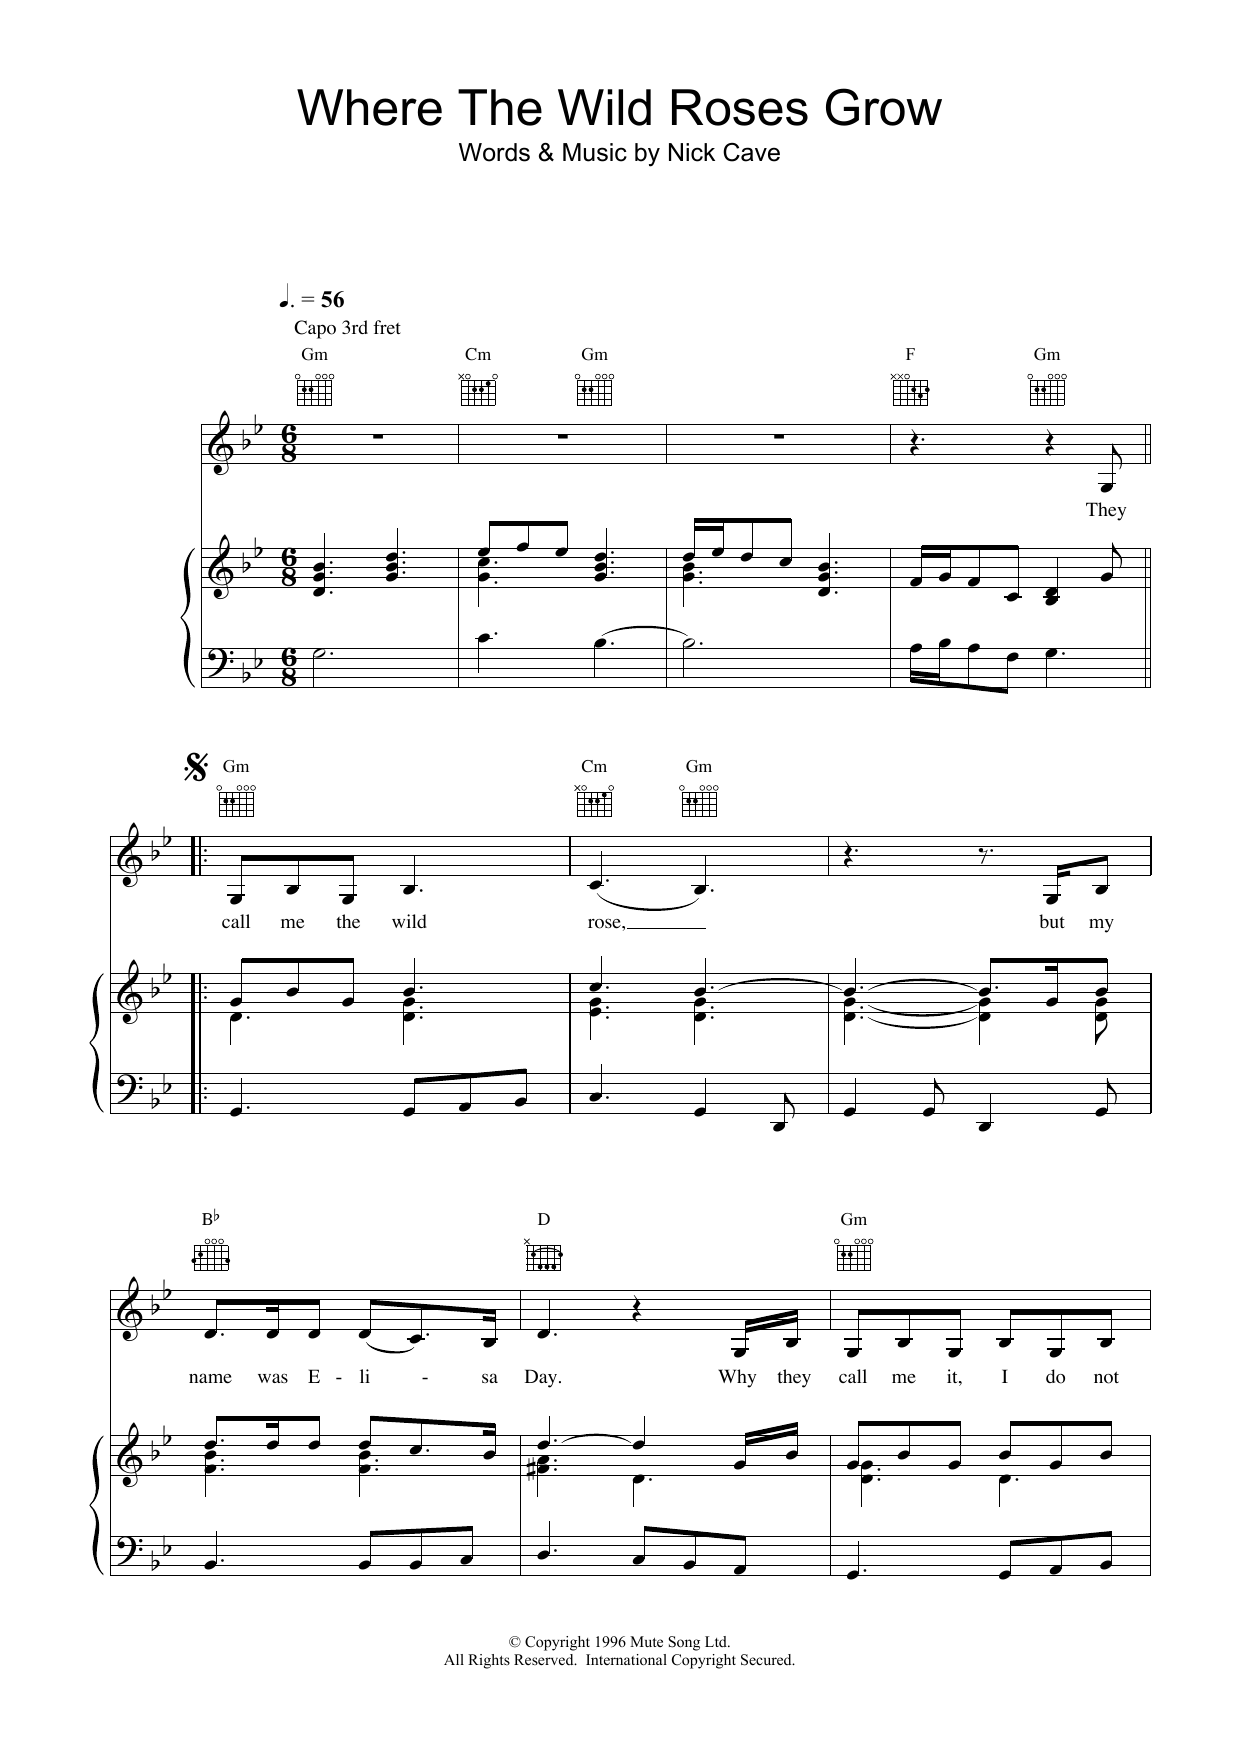 Nick Cave Where The Wild Roses Grow sheet music notes and chords. Download Printable PDF.